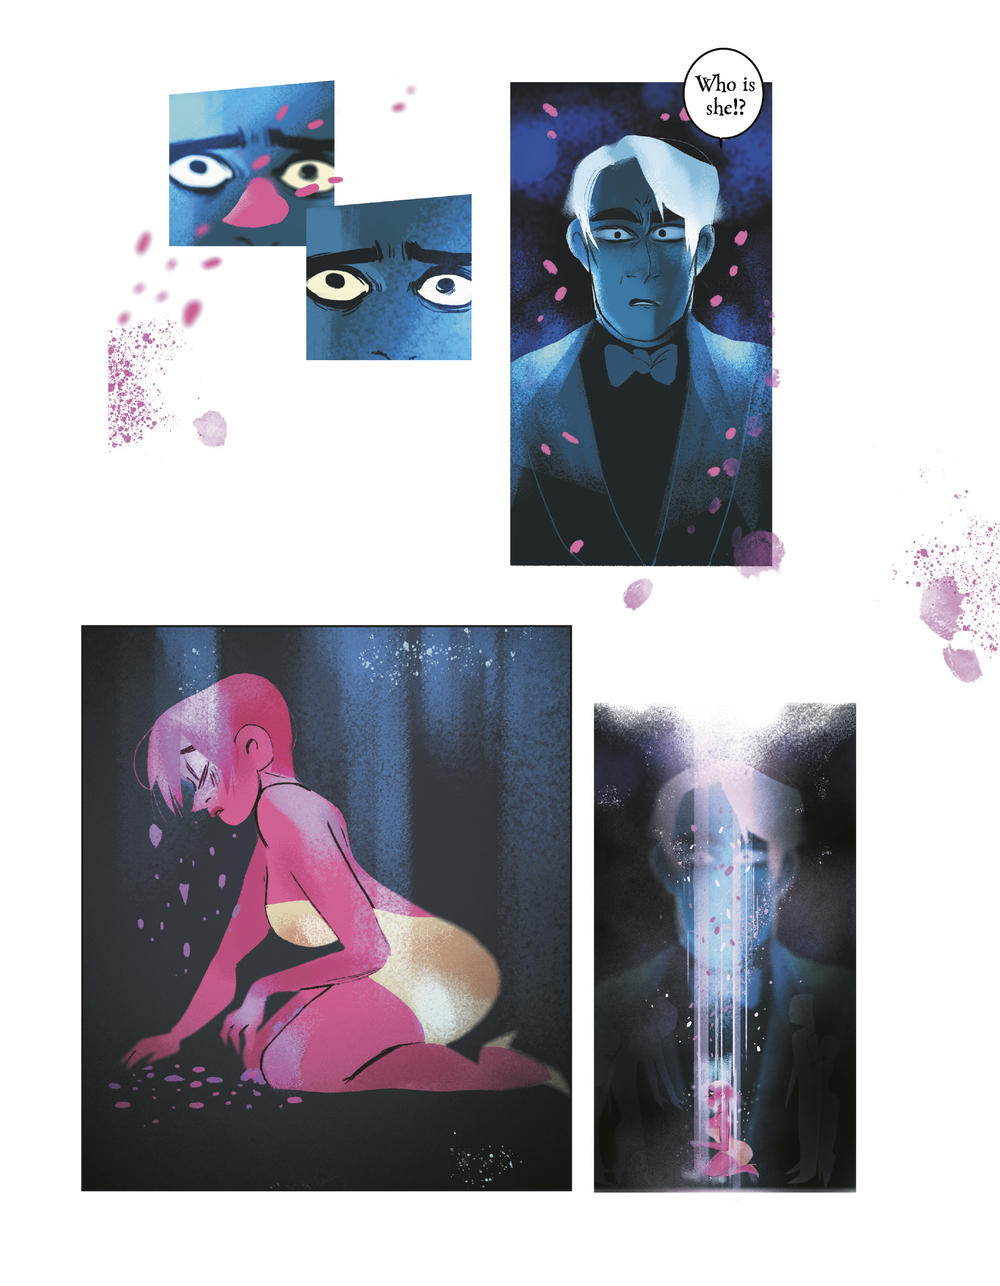 Hades spots Persephone for the first time in <em>Lore Olympus</em>